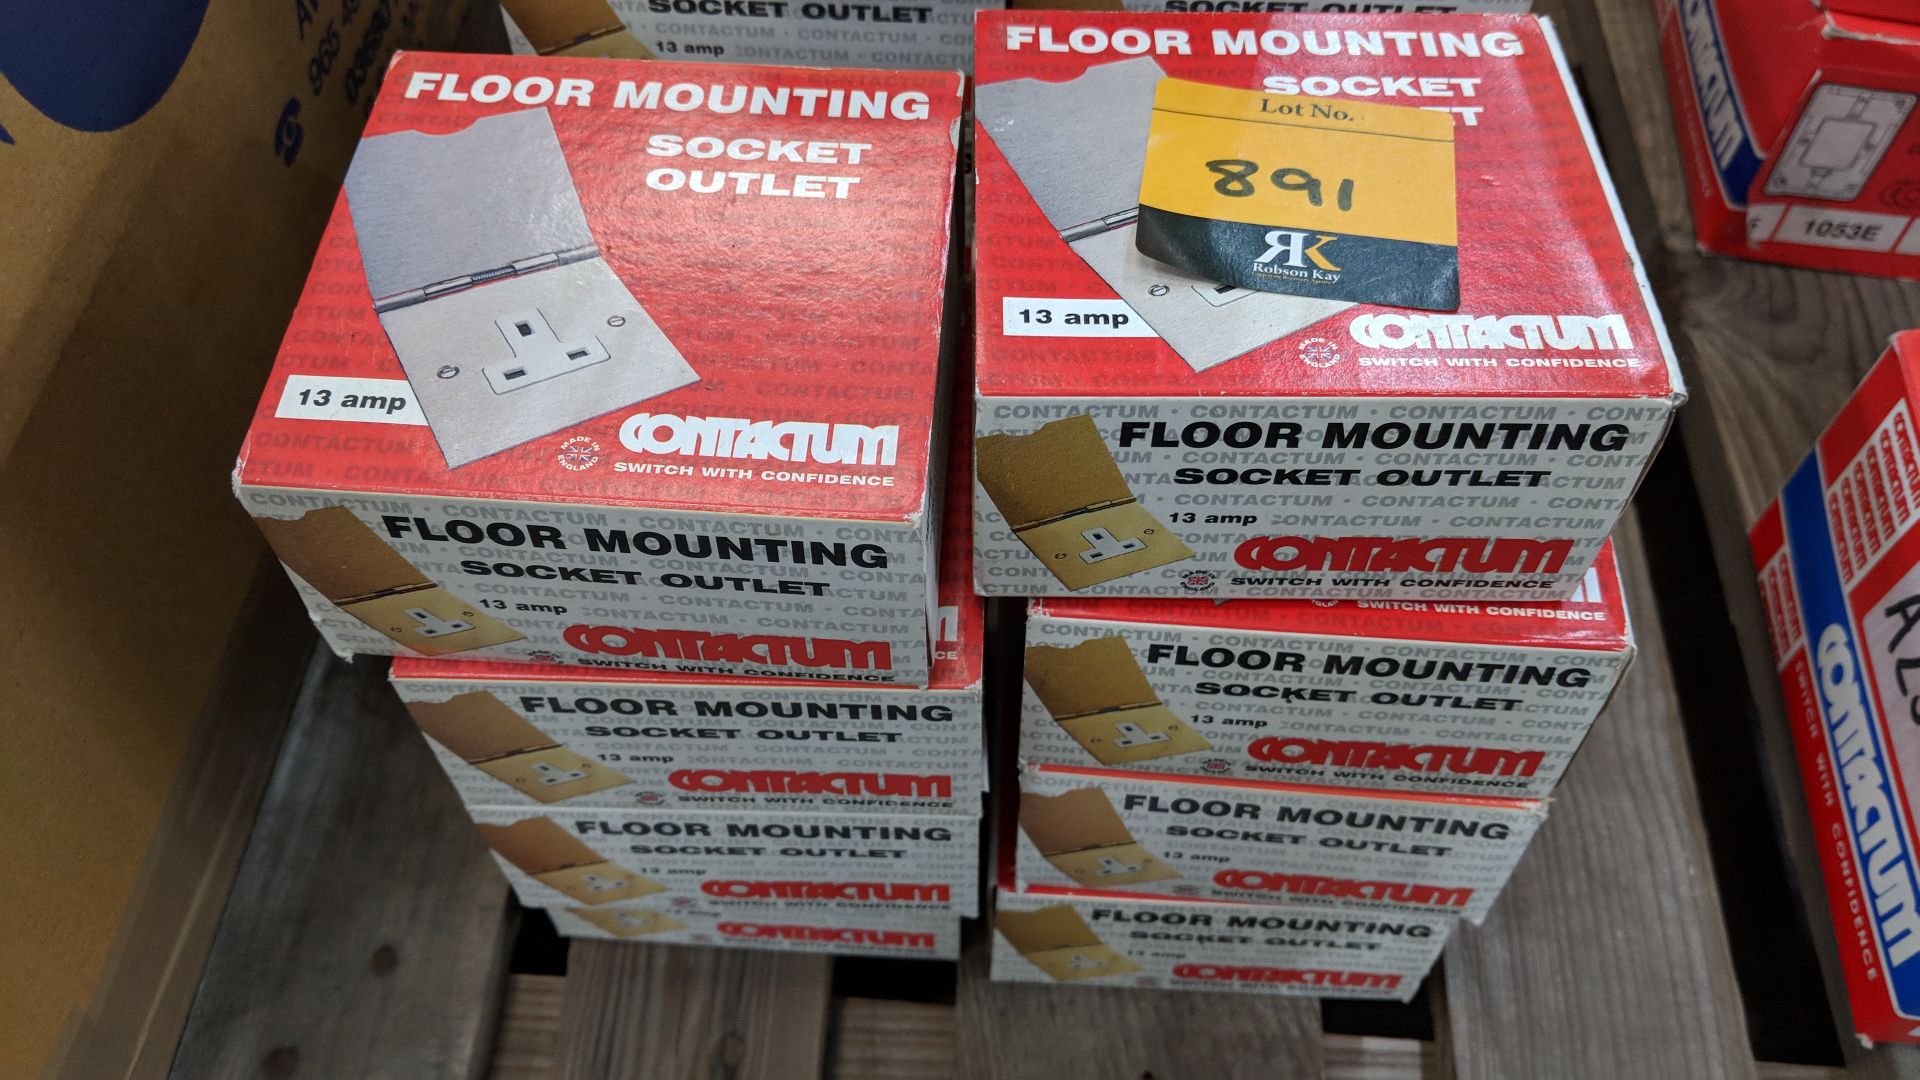 22 assorted boxes of Contactum floor mounting socket outlet product The vast majority of products in - Image 2 of 4